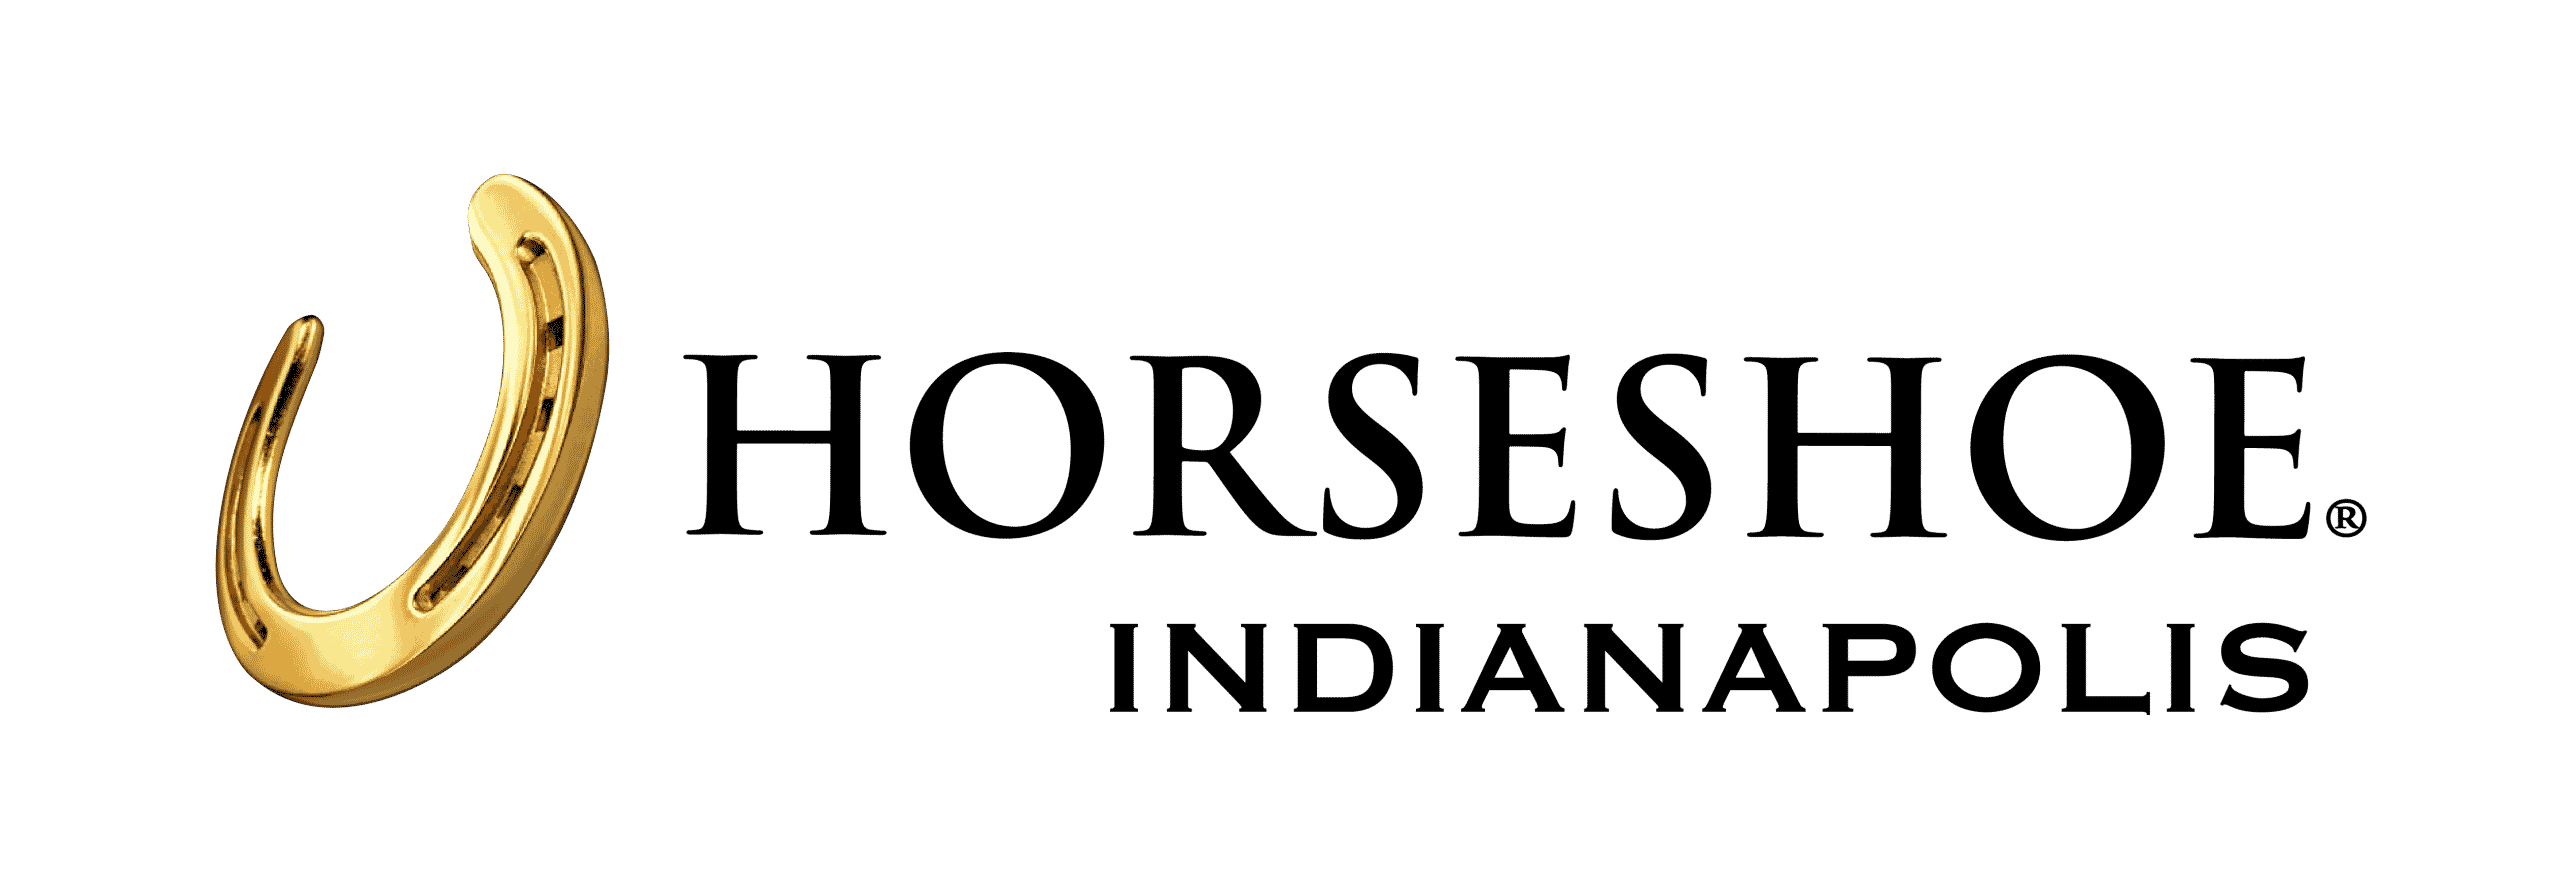 5/17 Horseshoe Indy (5th9th; All Stakes P4) At The Races with Steve Byk